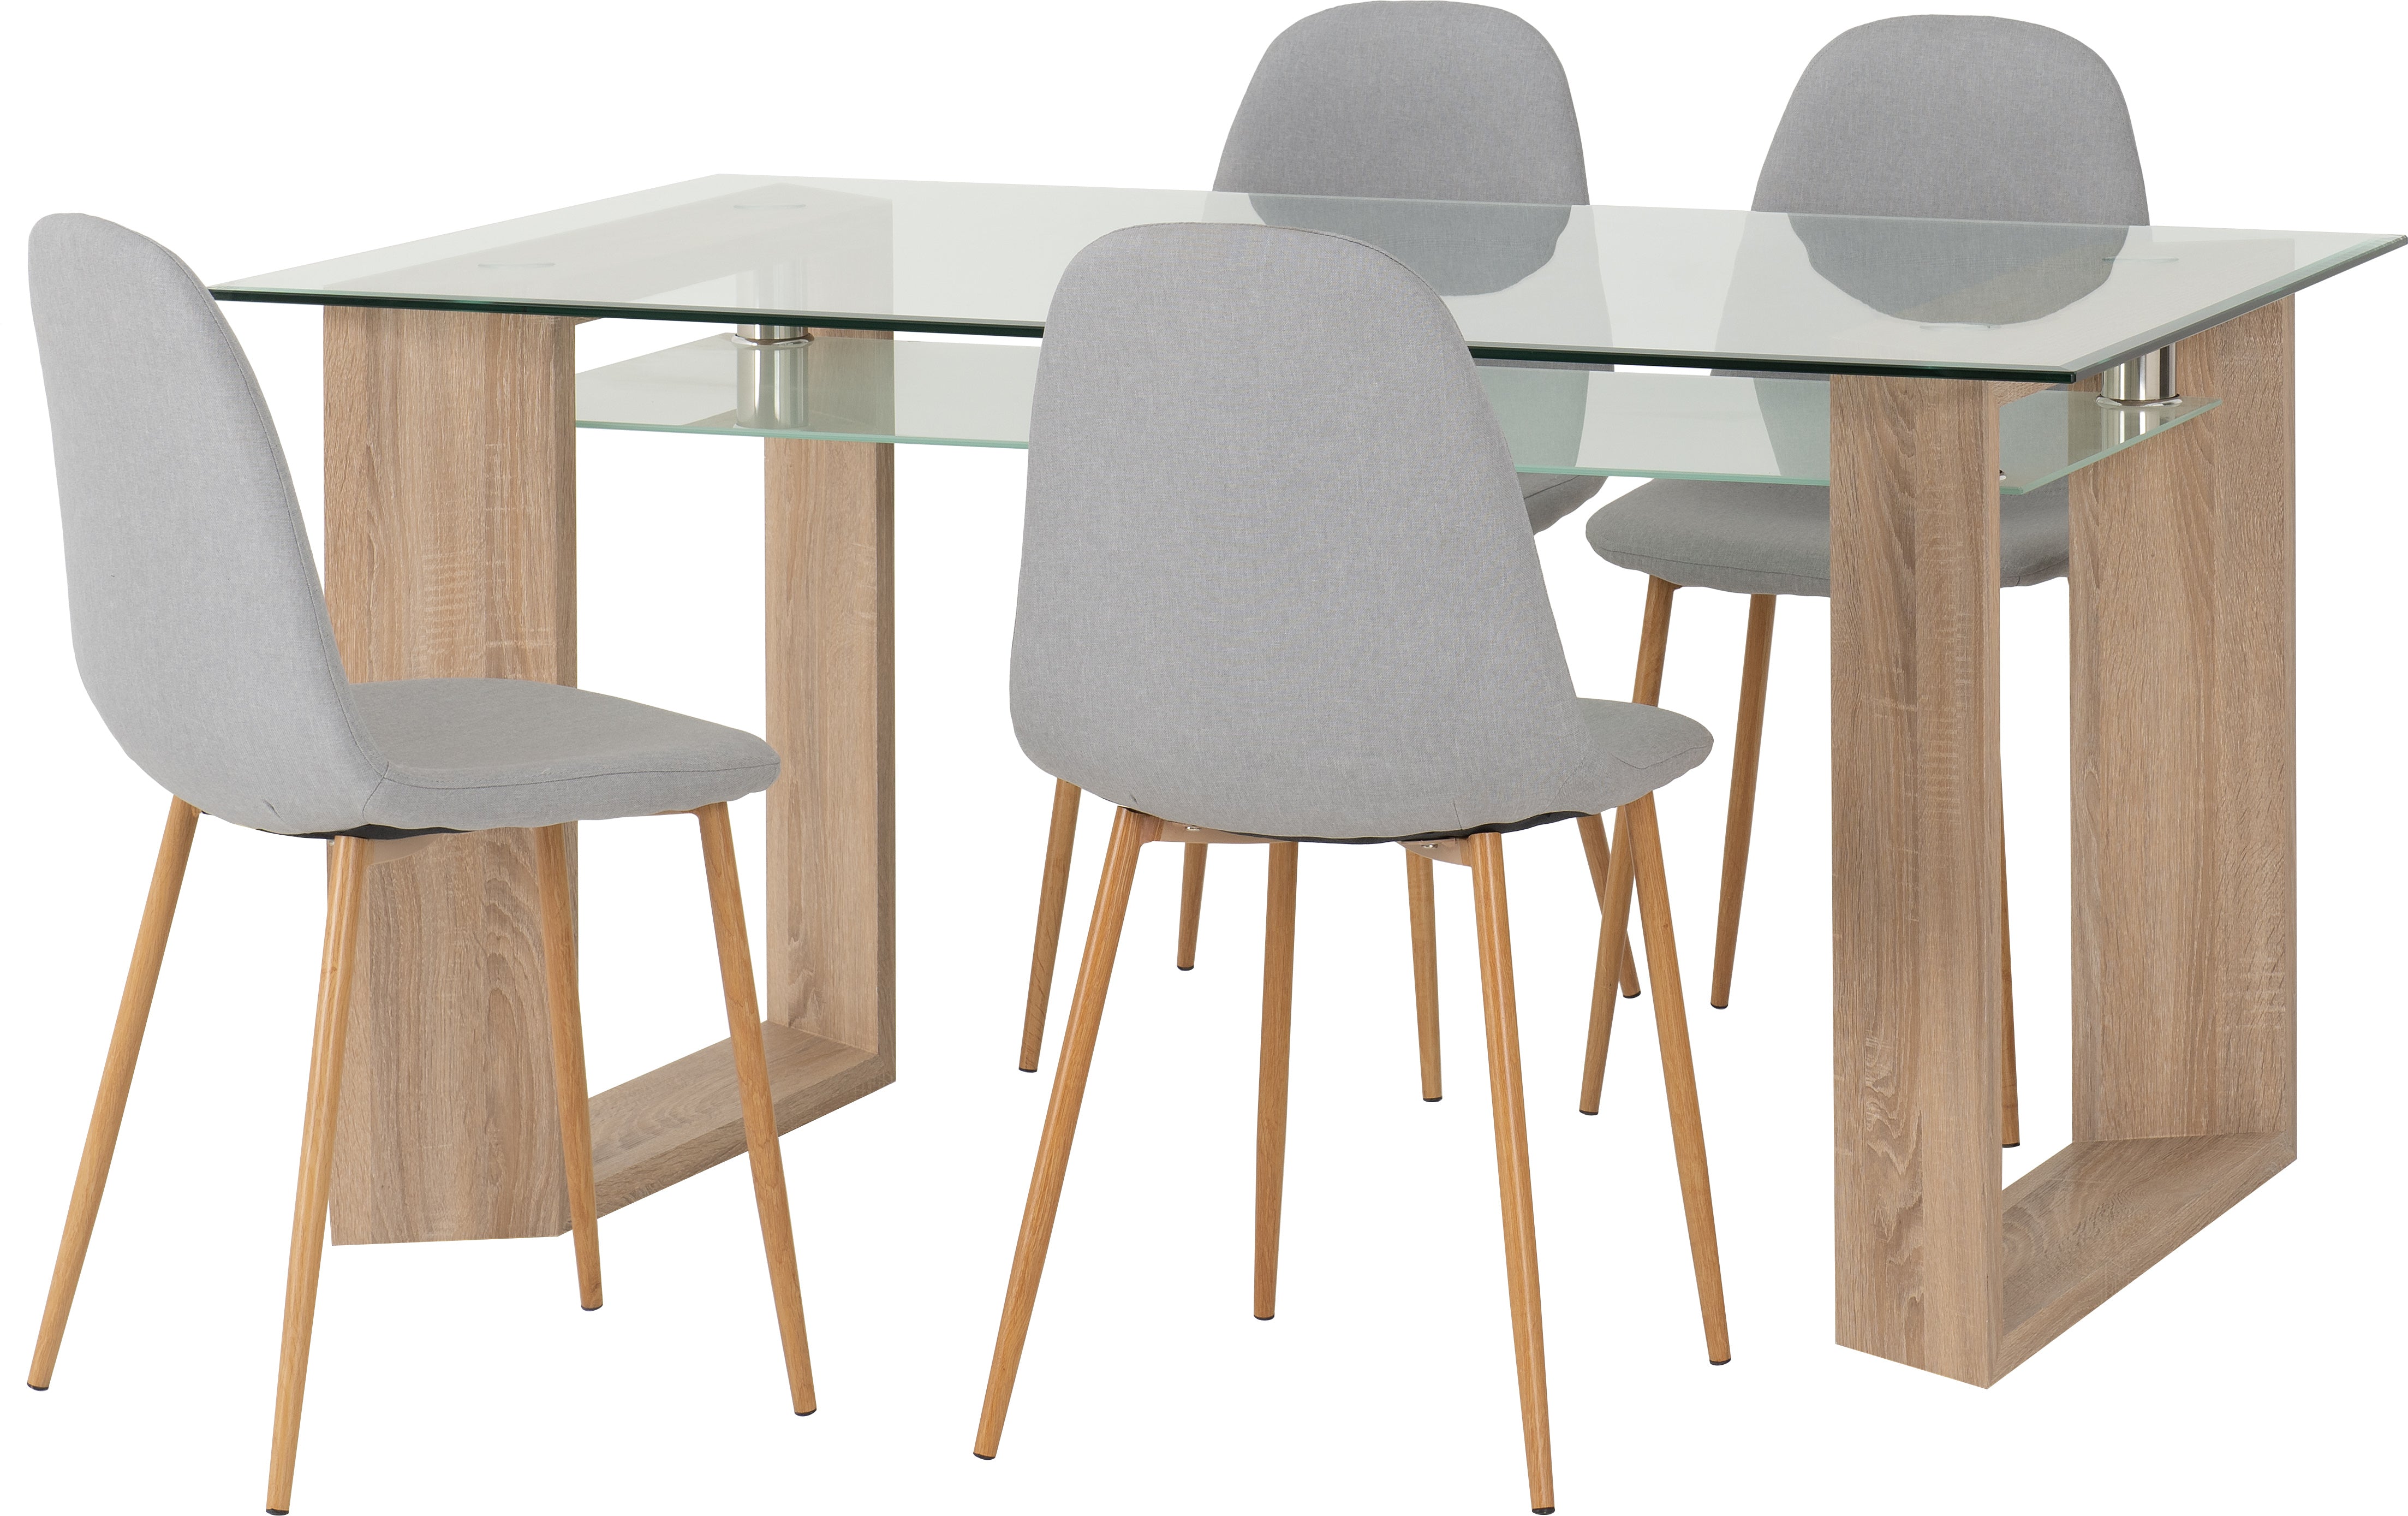 Milan Dining Set with Barley Chairs